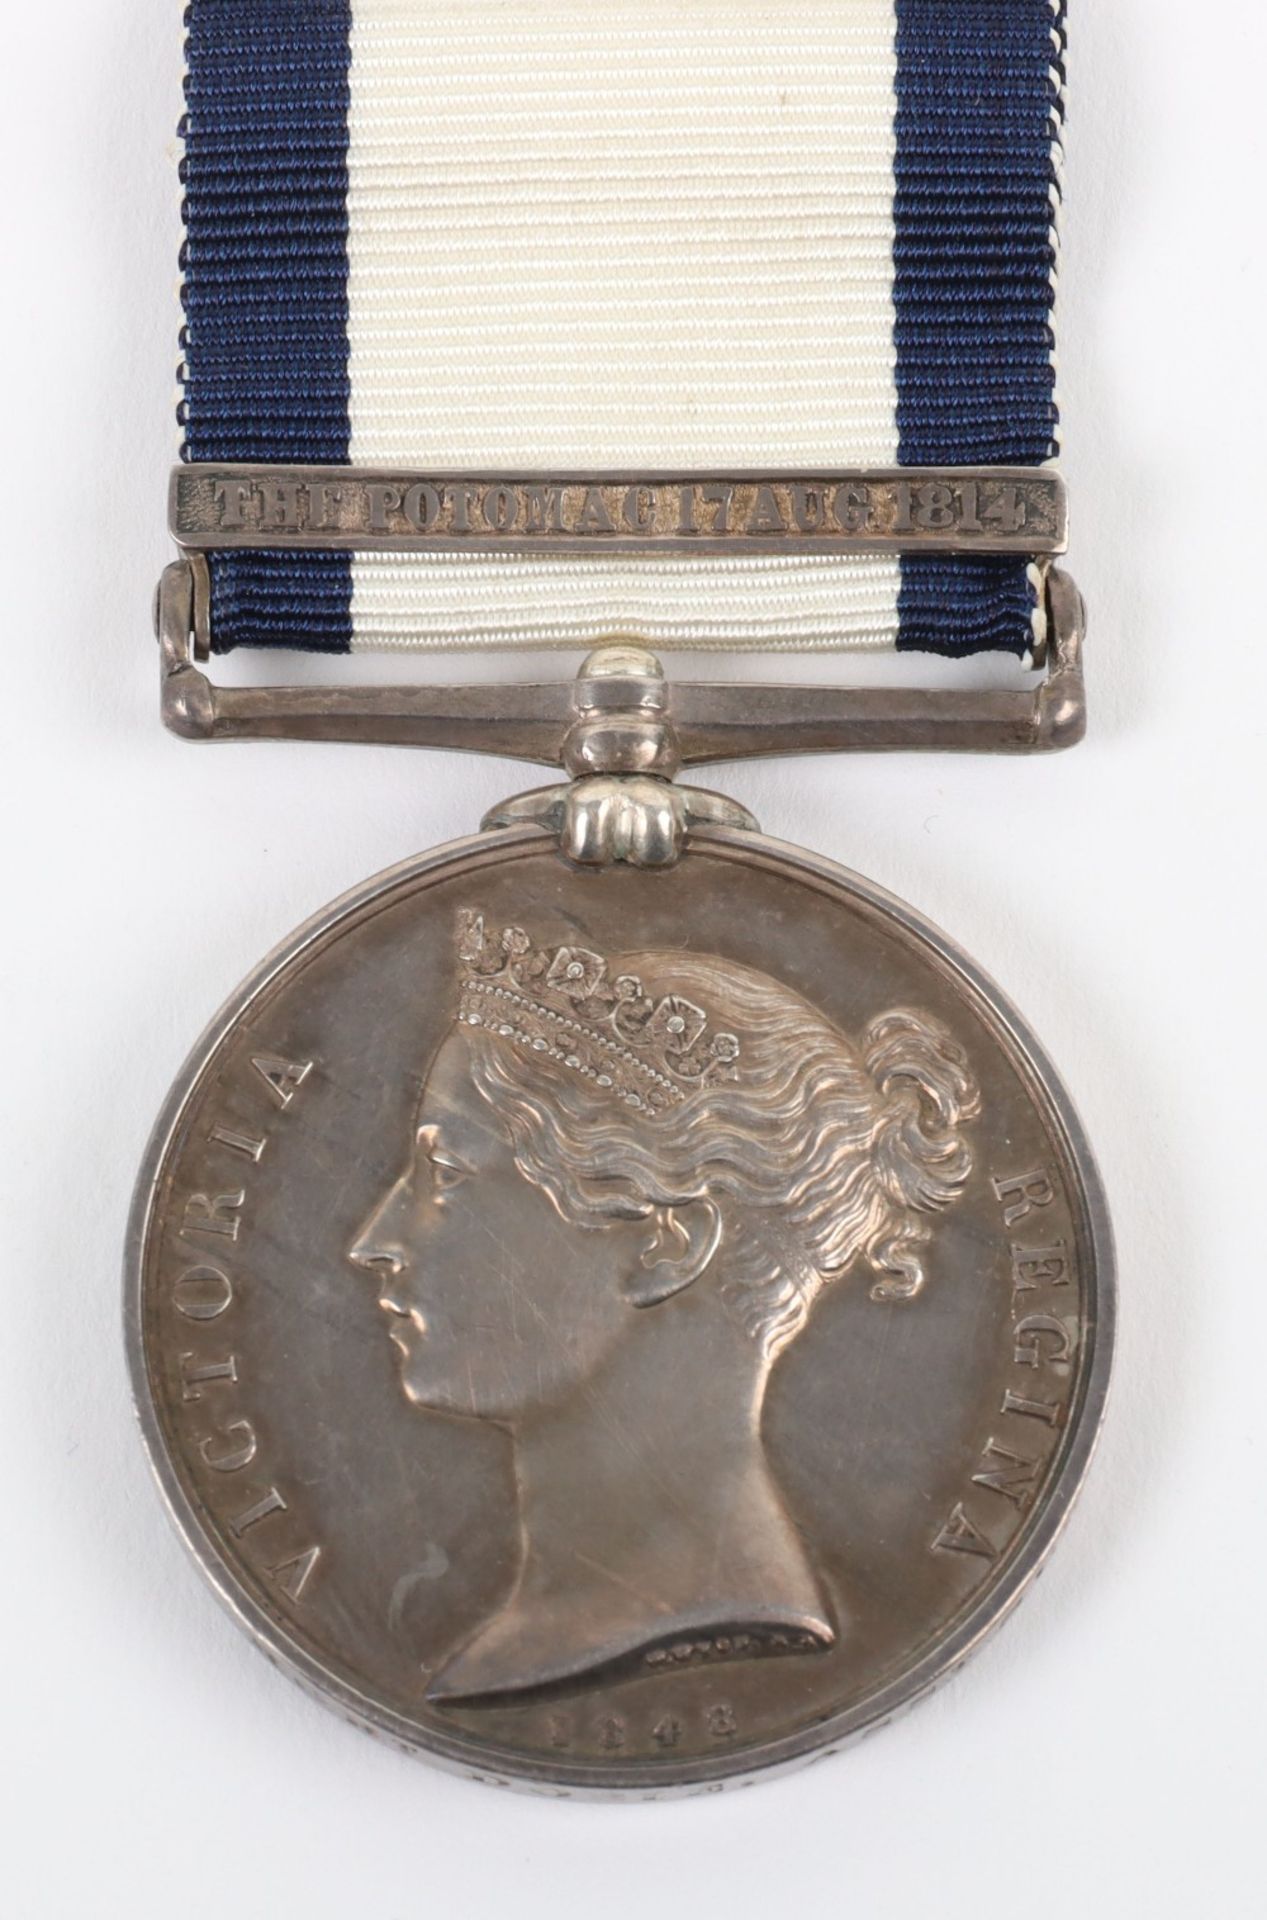 Naval General Service Medal 1793-1840 Awarded to Assistant Surgeon Robert Dobie for the Action on th